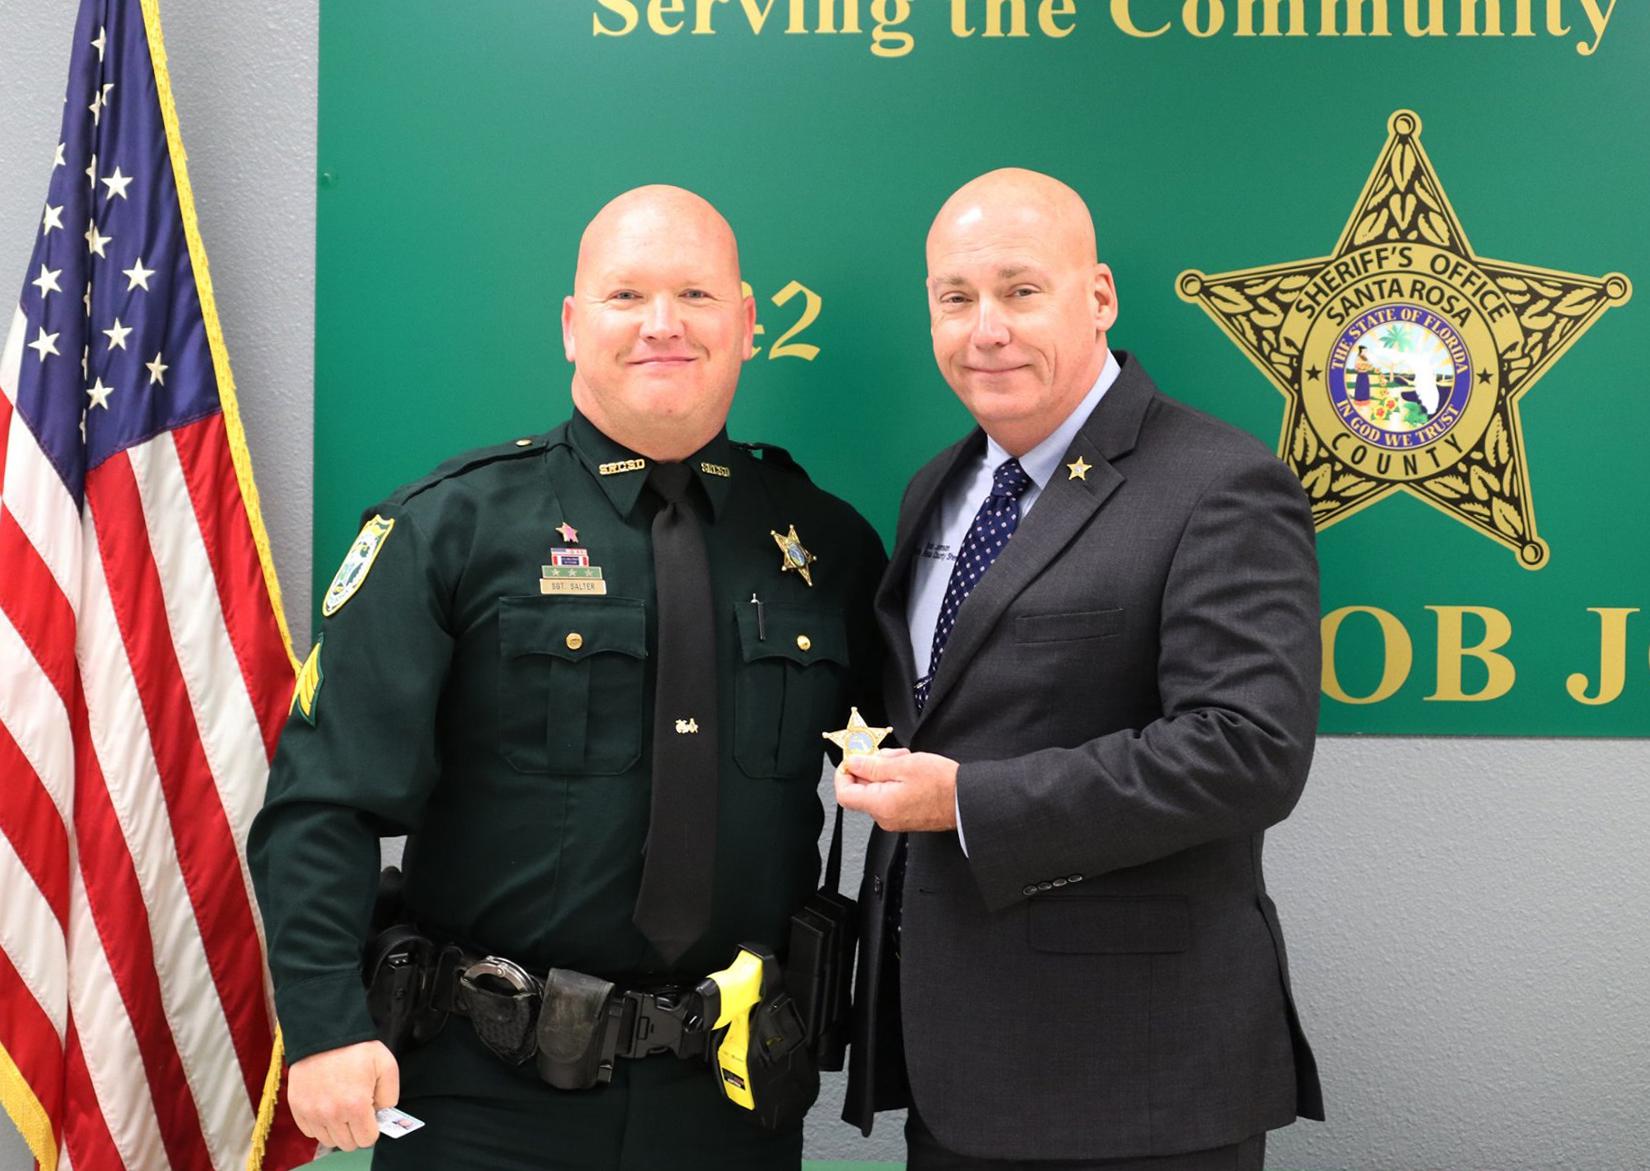 Congratulations to Santa Rosa County Sheriff's Office's newly promoted Lt. Allan Salter. Effective this Salter will be assigned to patrol as a Watch Lieutenant. Congratulations and continued success in your new position.